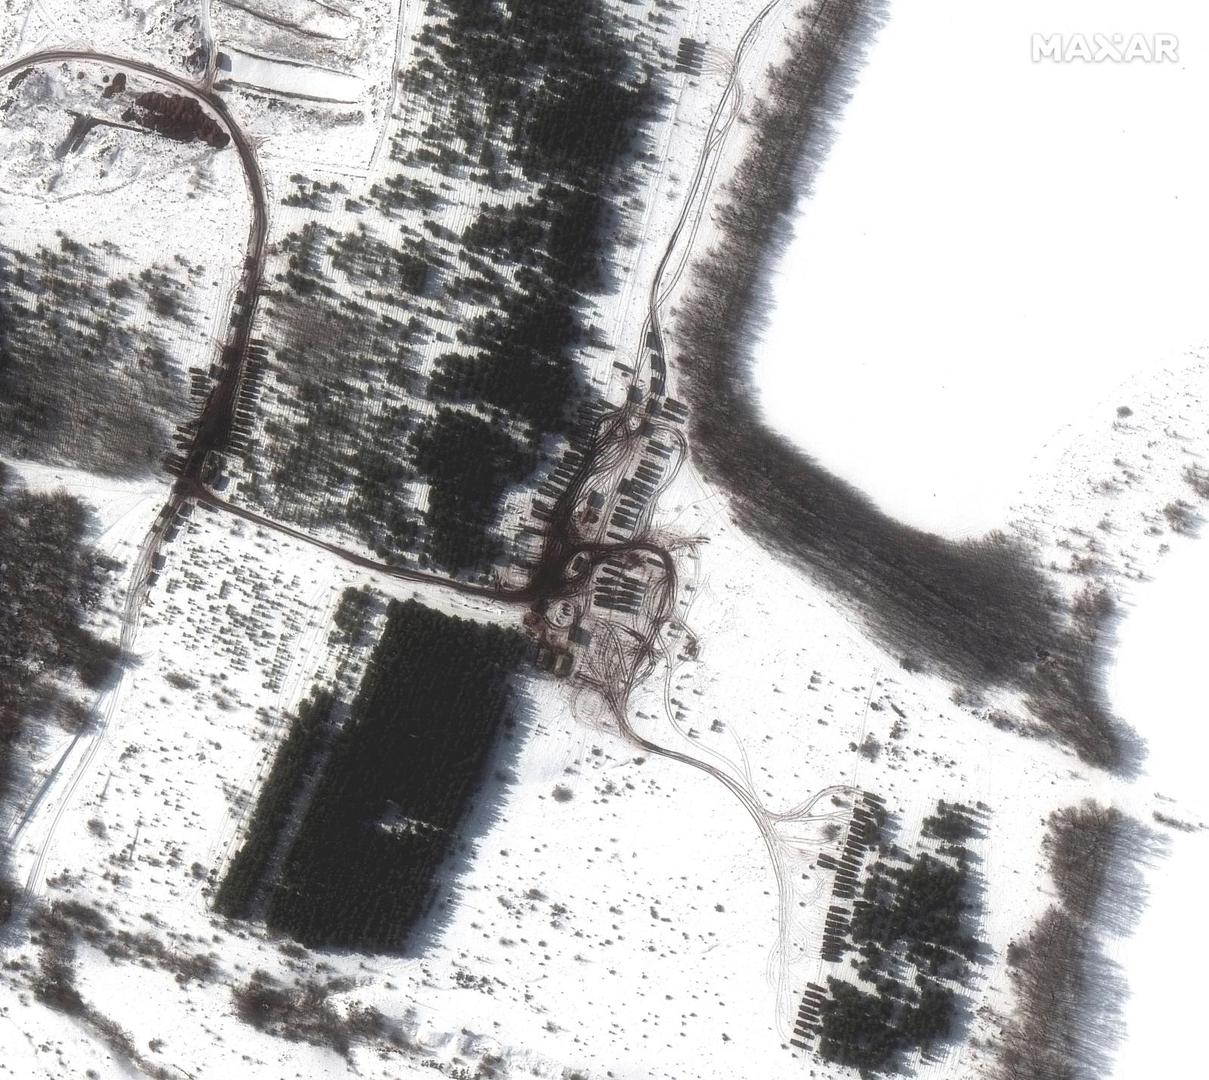 A satellite image shows an overview of a new deployment, east of Valuyki, Russia February 19, 2022. Picture taken February 19, 2022. Maxar Technologies/Handout via REUTERS ATTENTION EDITORS - THIS IMAGE HAS BEEN SUPPLIED BY A THIRD PARTY. NO RESALES. NO ARCHIVES. MANDATORY CREDIT. DO NOT OBSCURE LOGO Photo: MAXAR TECHNOLOGIES/REUTERS